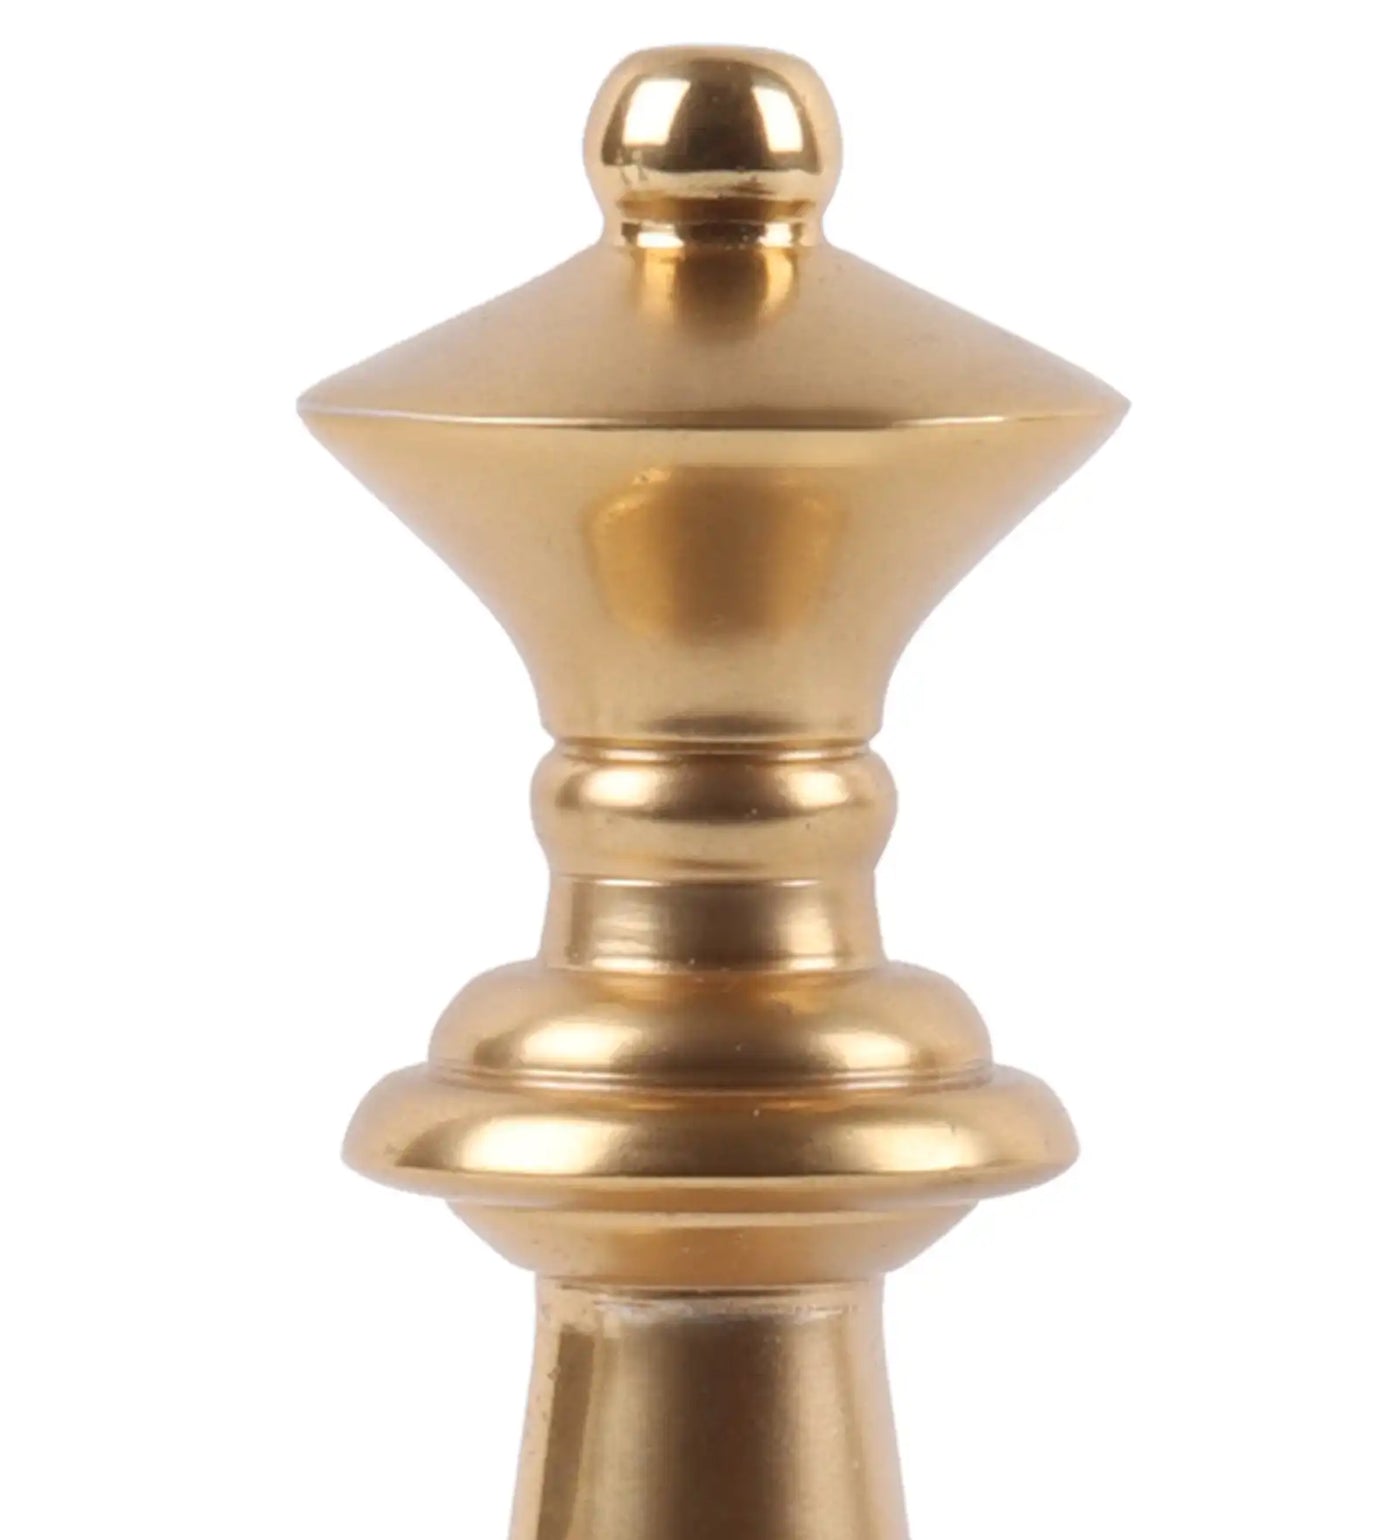 Chess King Queen Gold Small Set-70-336-14G